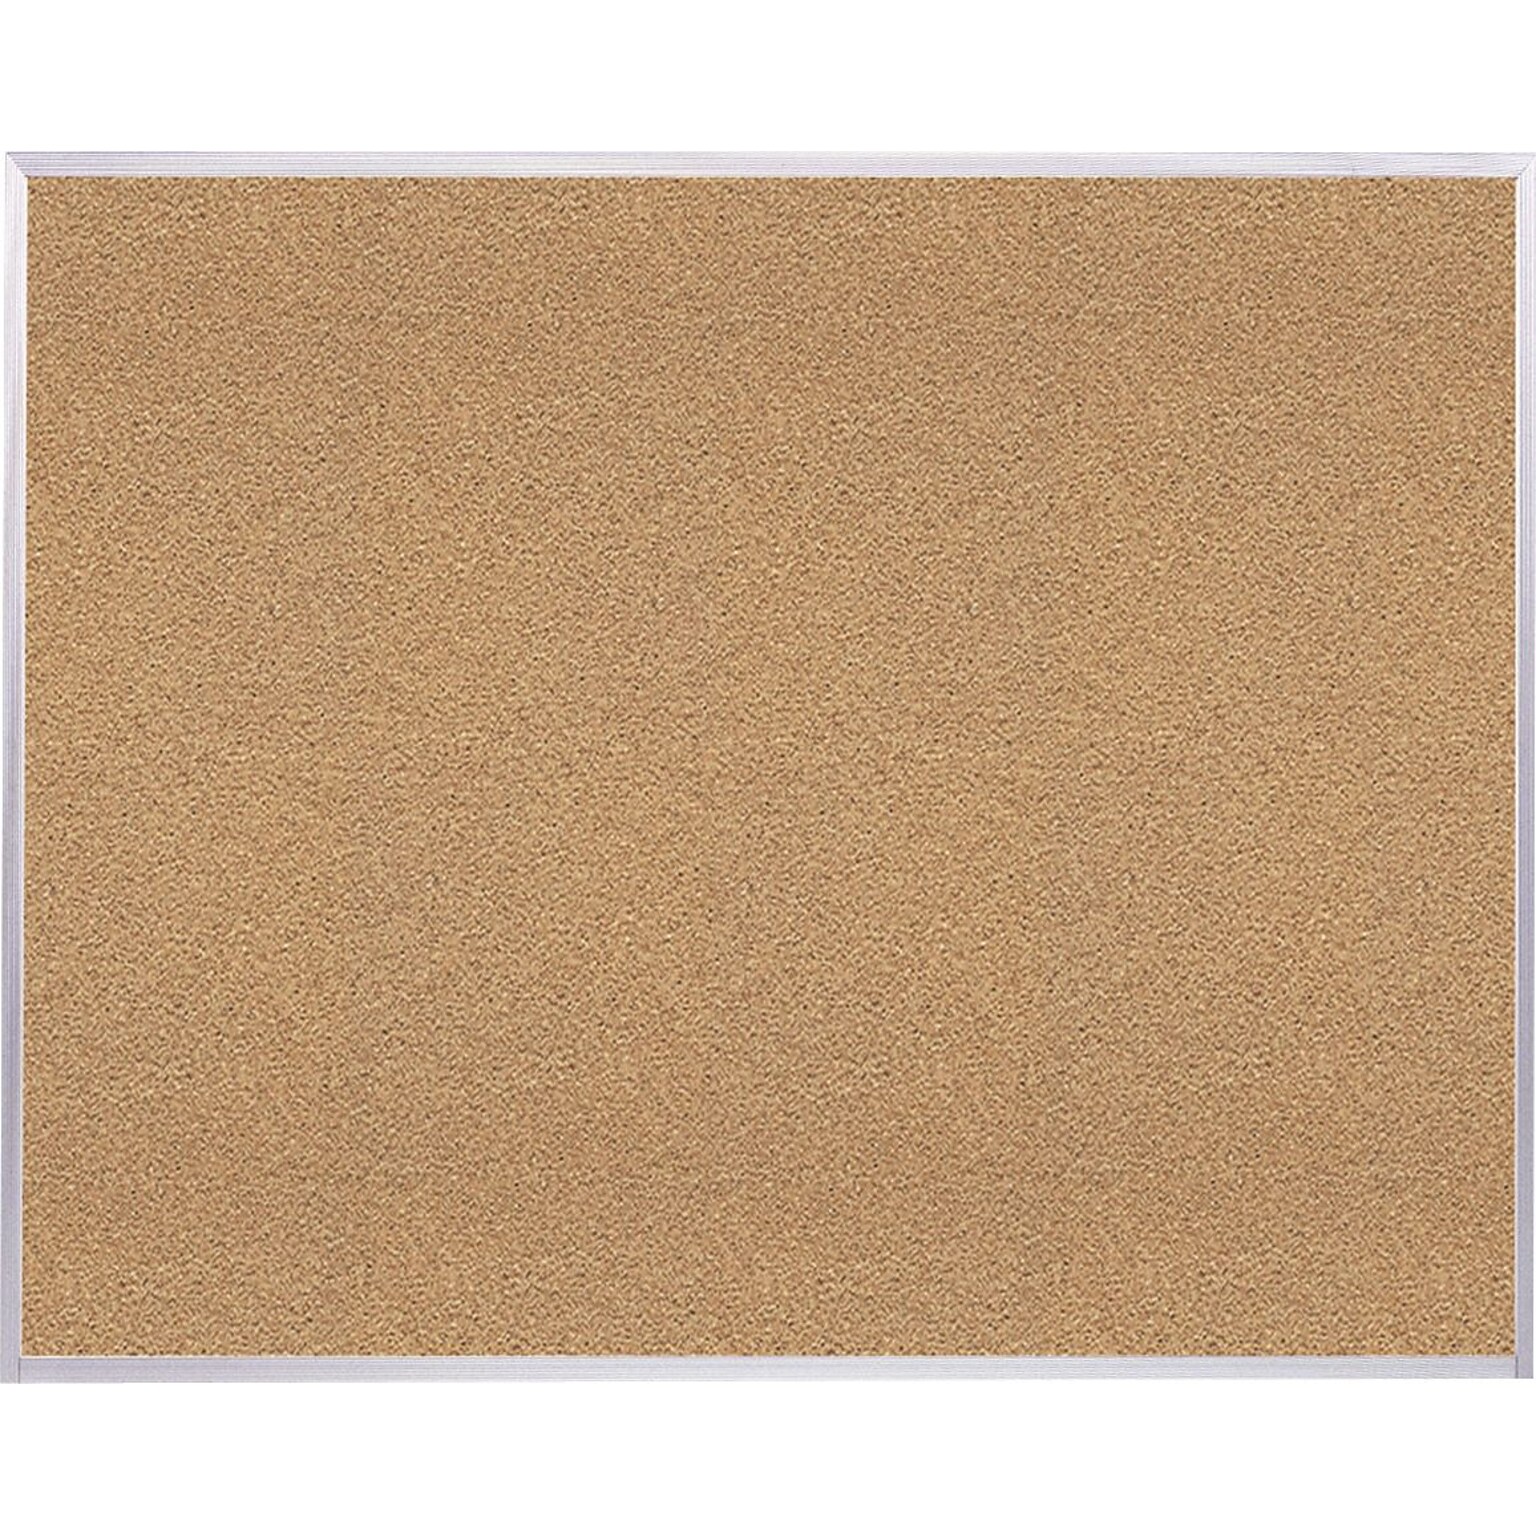 Ghent Natural Cork Bulletin Board with Aluminum Frame, 4H x 6W